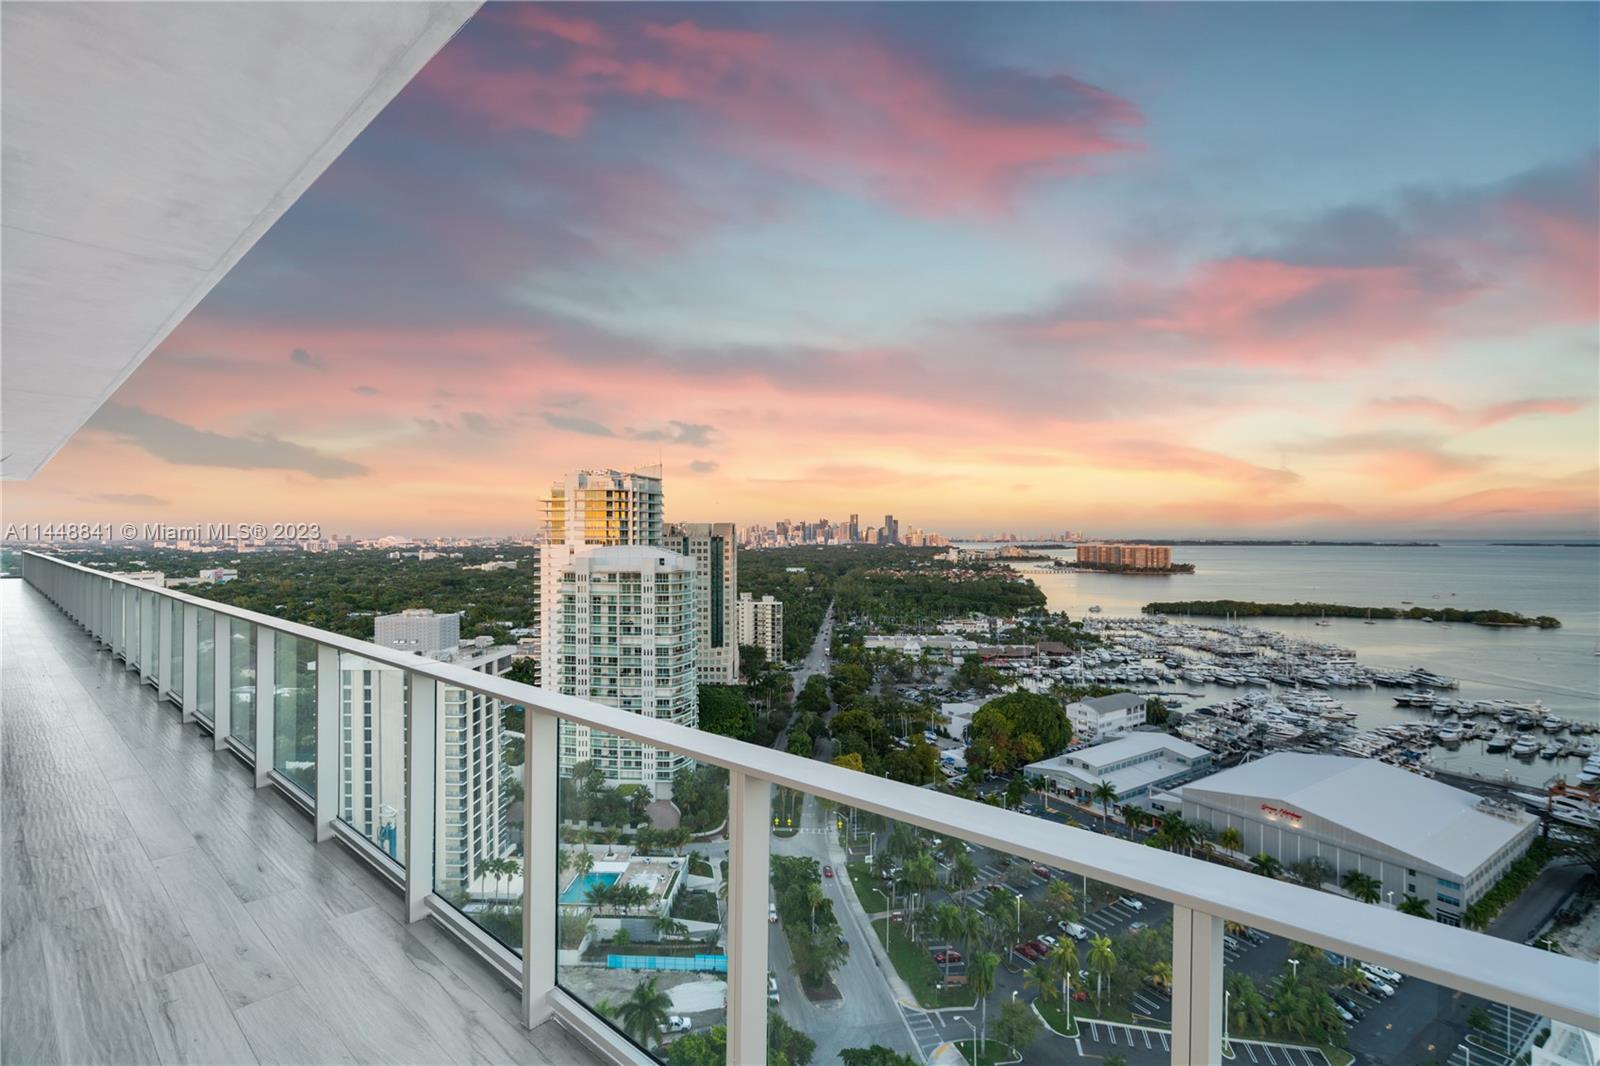 In the heart of Coconut Grove, footsteps away from couture shopping and exquisite dining sits this magnificent,
fully-furnished 10,180 square foot penthouse in the sky. Surrounding this generous living space is an expansive
veranda, capturing majestic views of Biscayne Bay. Renowned, award-winning designer, Steven G, created
exquisite spaces throughout this substantial home in the sky, including 6 bedrooms, 7.5 bathrooms, 2 offices, a
bar, a wine cellar, entertainment space, and much more, including a private plunge pool and a 4 car private
garage. A unit you’ll have to see to believe.